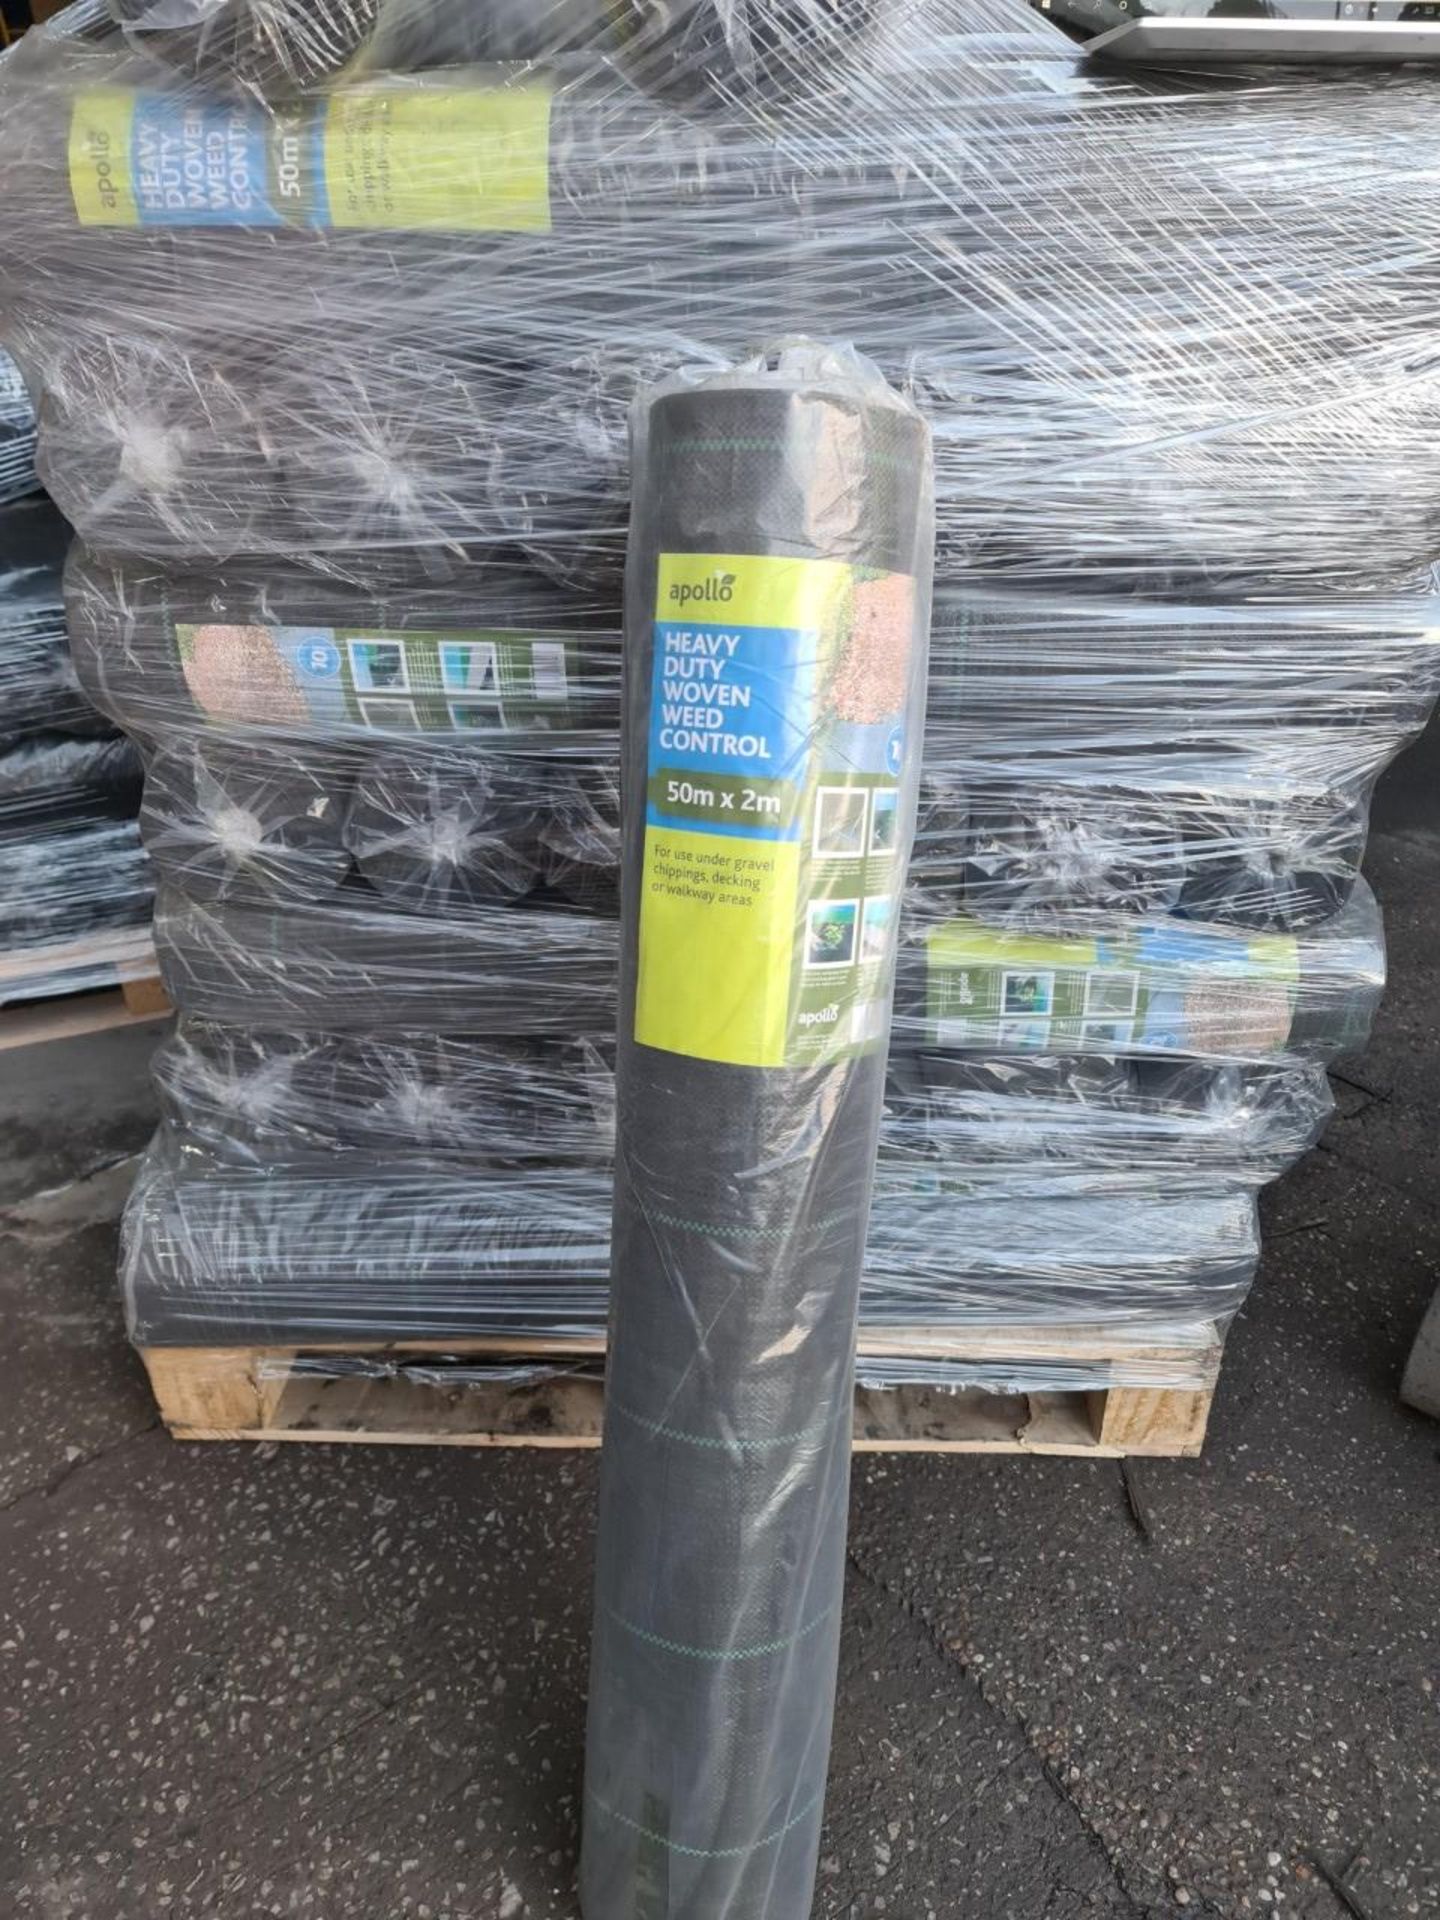 (J21) PALLET TO CONTAIN 42 x APOLO HEAVY DUTY WOVEN WEED CONTROL 50 X2m. FOR USE UNDER GRAVEL - Image 2 of 2